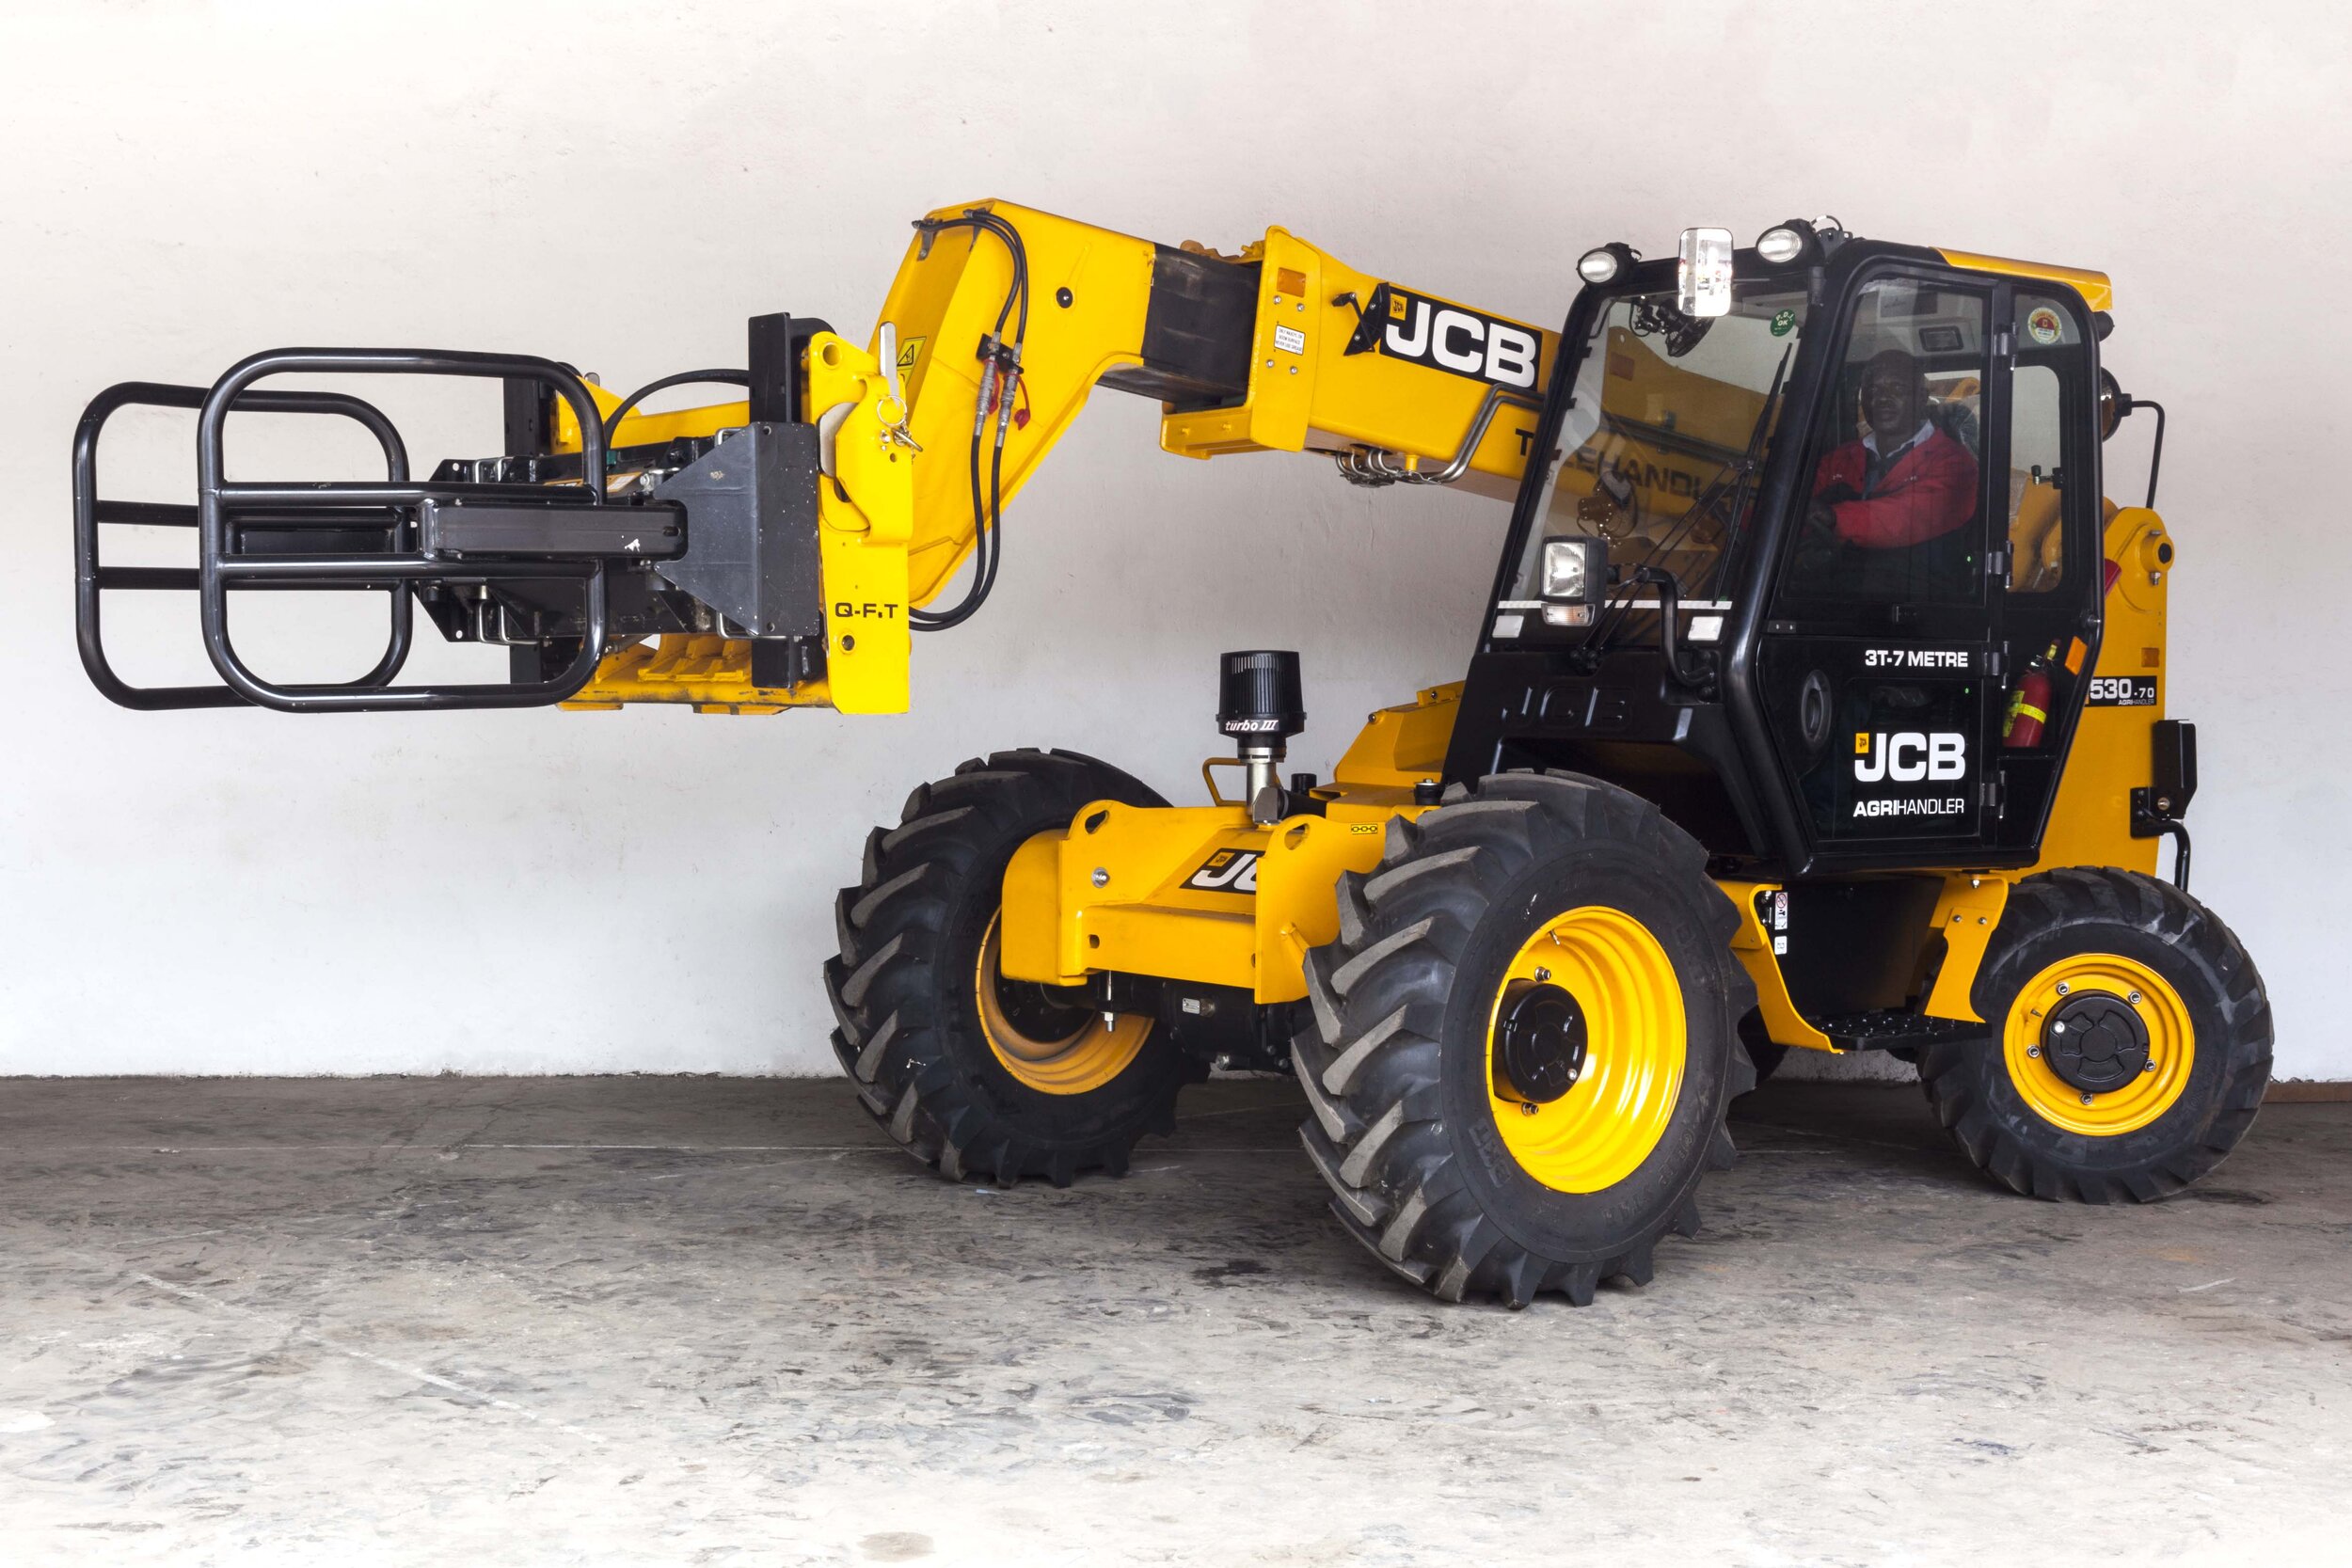  JCB  LOADALL  530 - 70 WITH ROUND BALE GRAB   